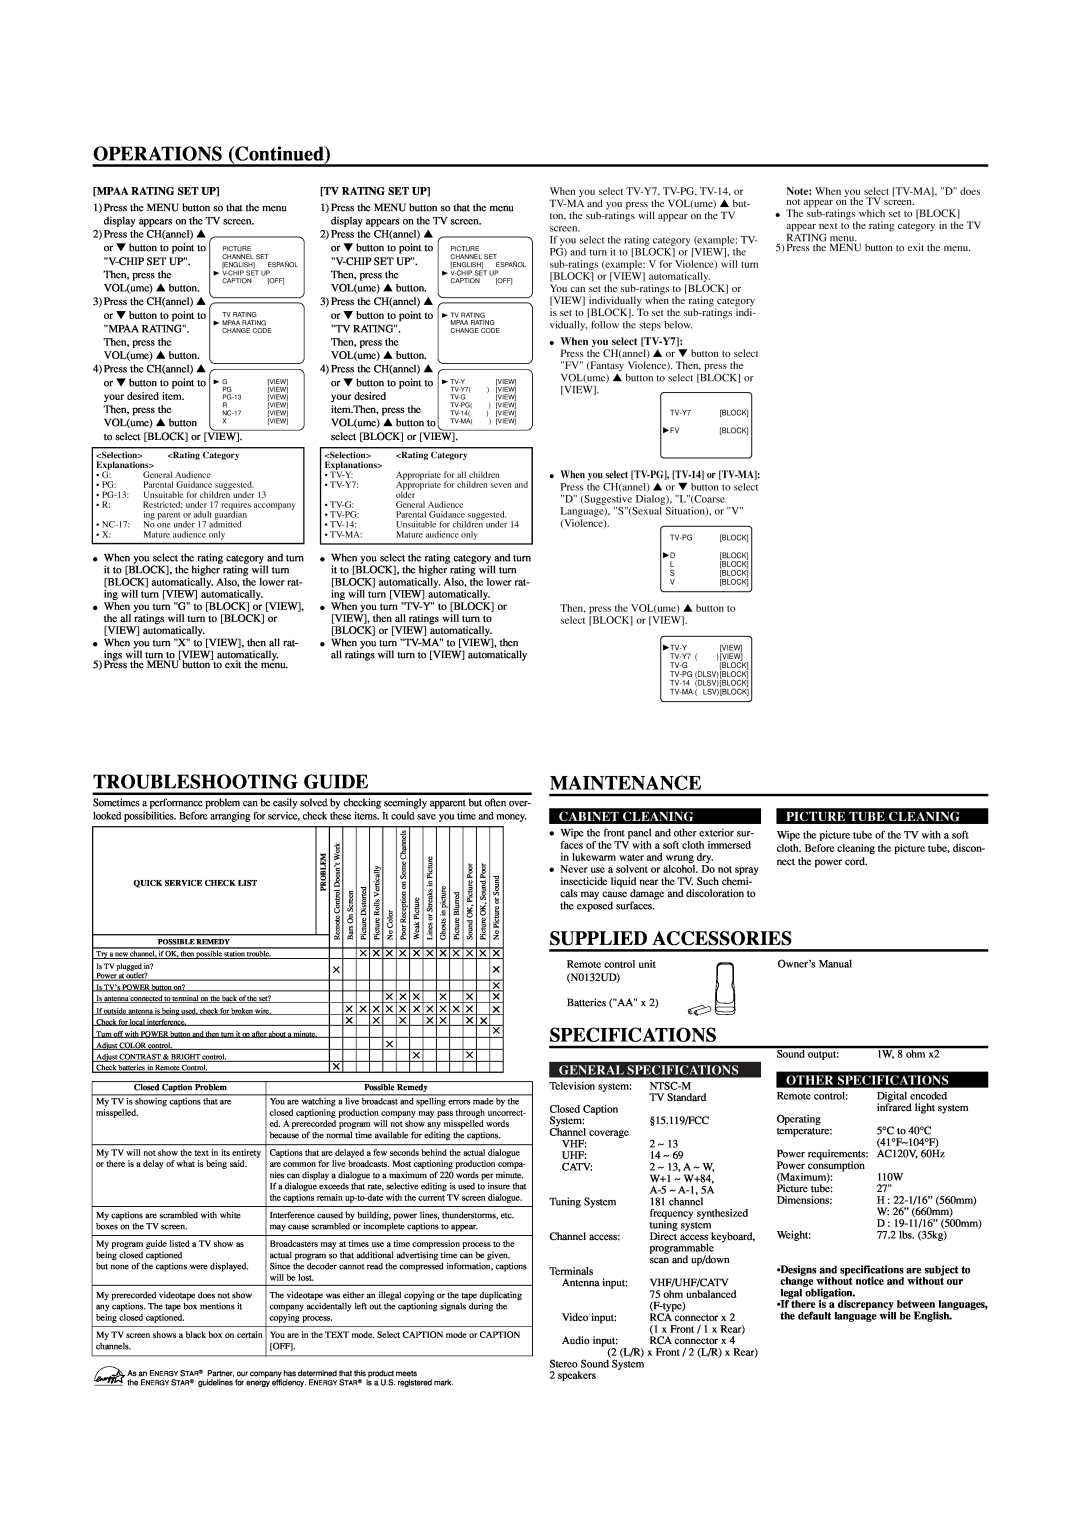 Sylvania SST4272 OPERATIONS Continued, Troubleshooting Guide, Maintenance, Supplied Accessories, Specifications 